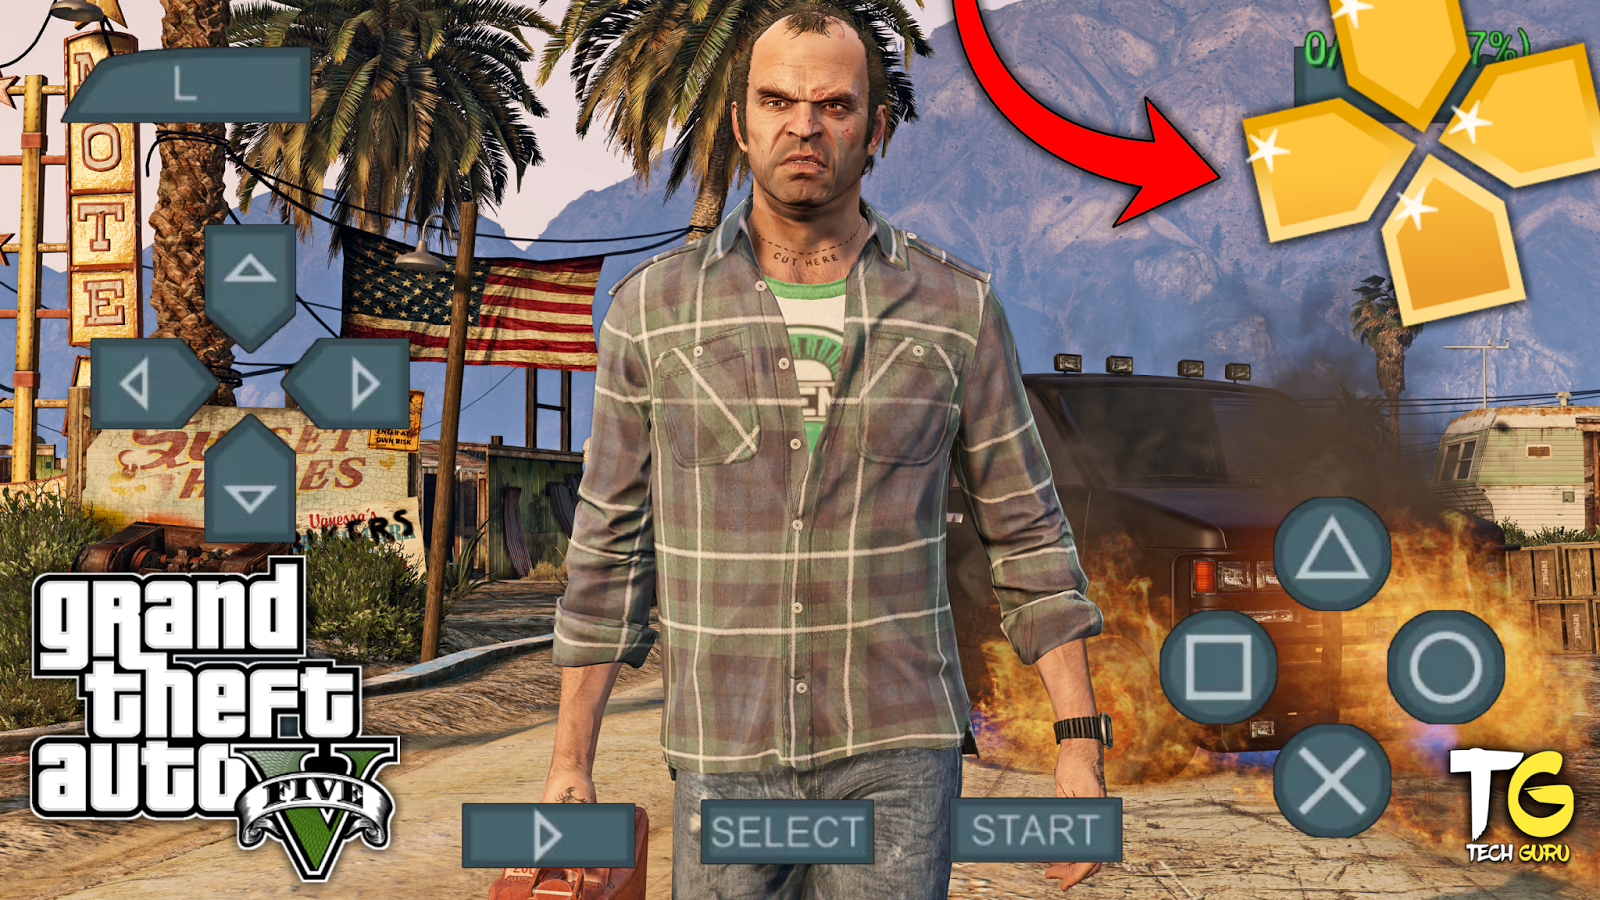 gta 5 download for android free full version 2021